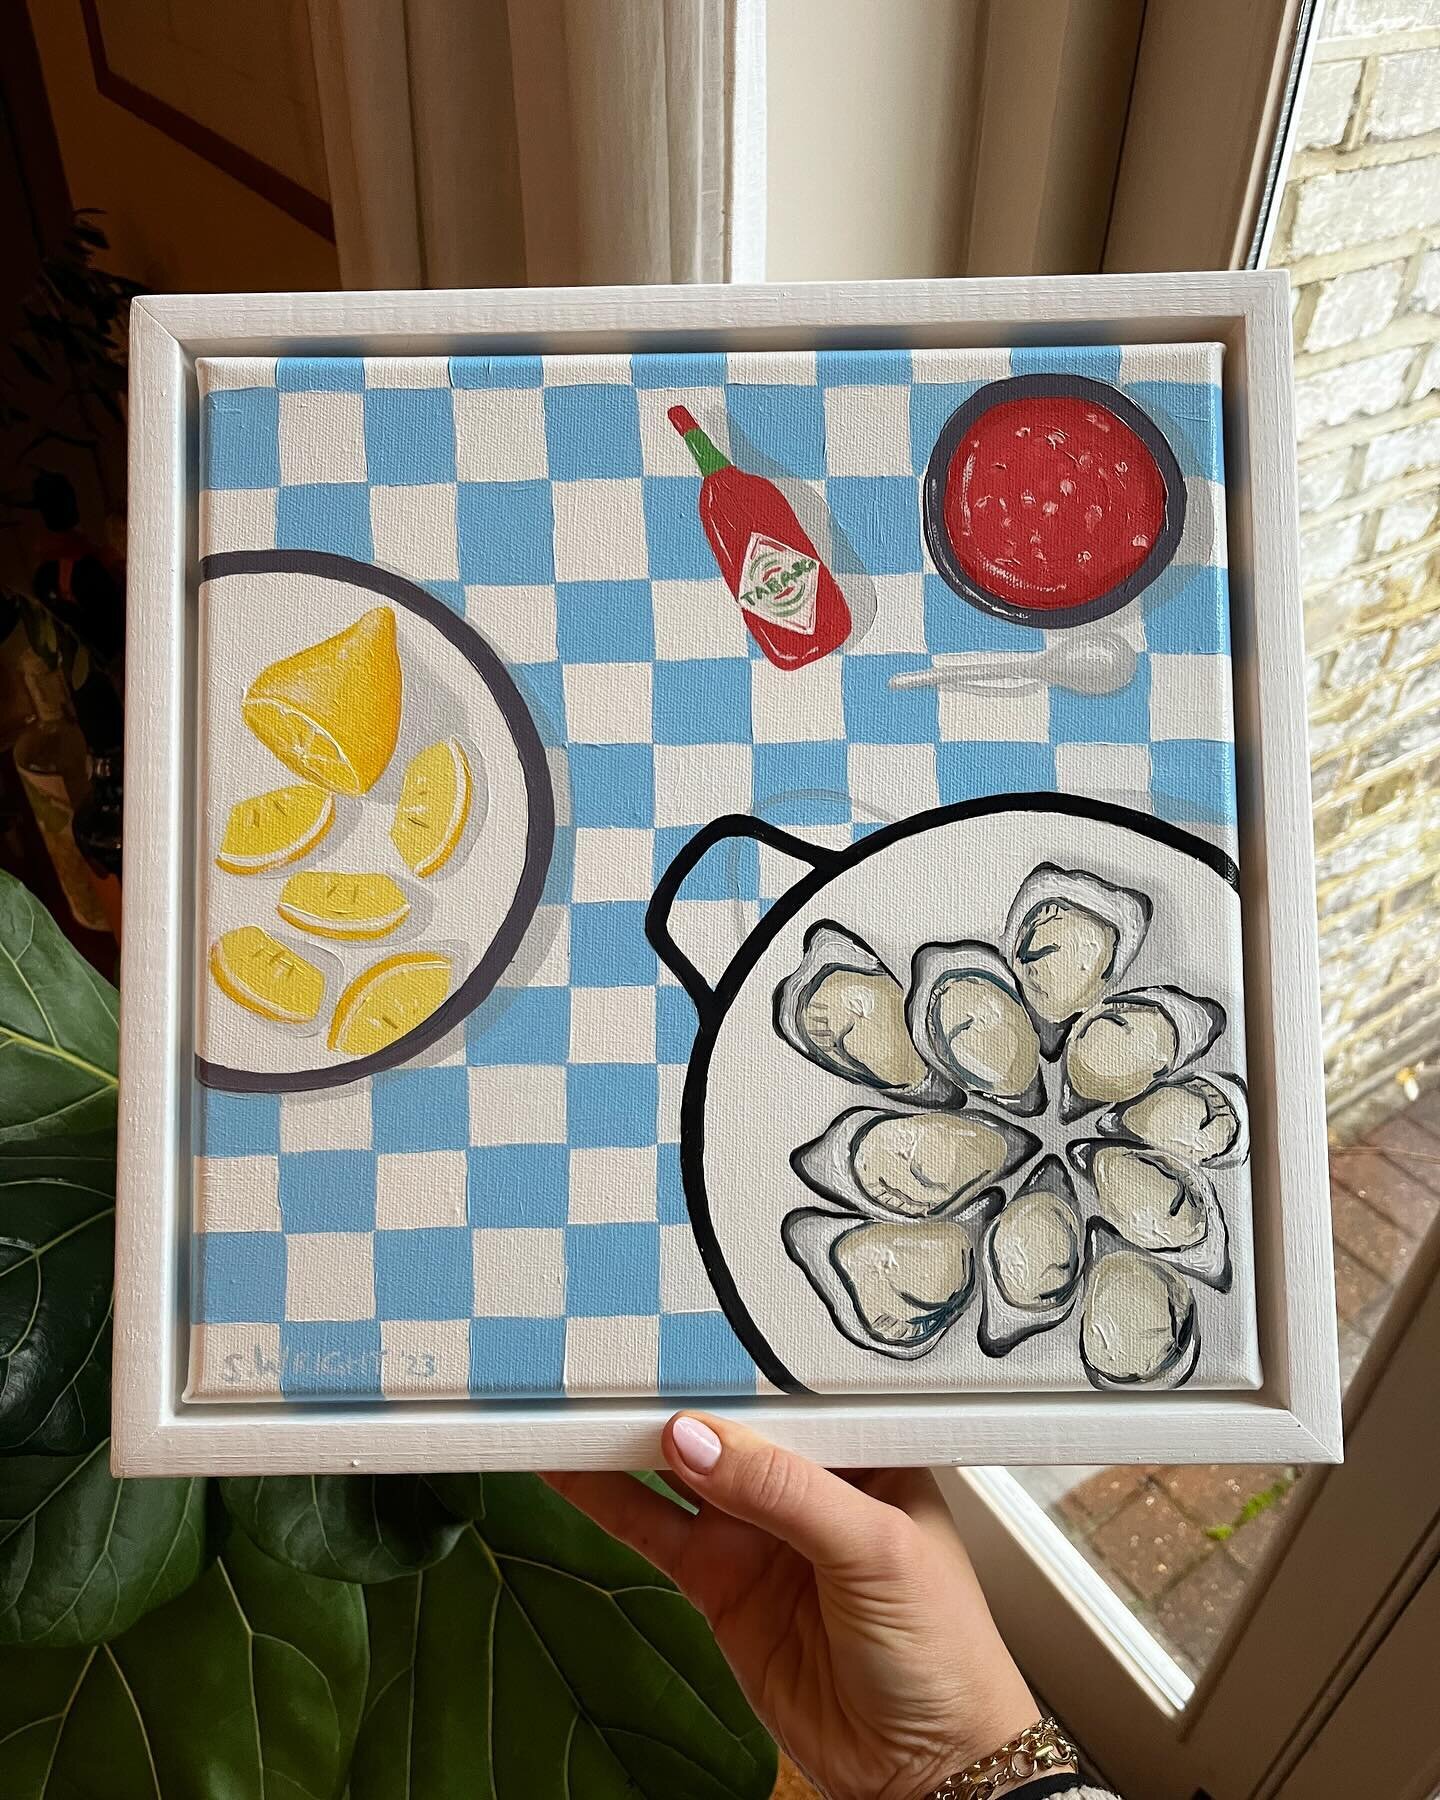 My last commission of 2023 - some more oysters, lemon, Tabasco and vinaigrette 🦪 🍋 #commission #oysters #oilpainting #tabasco